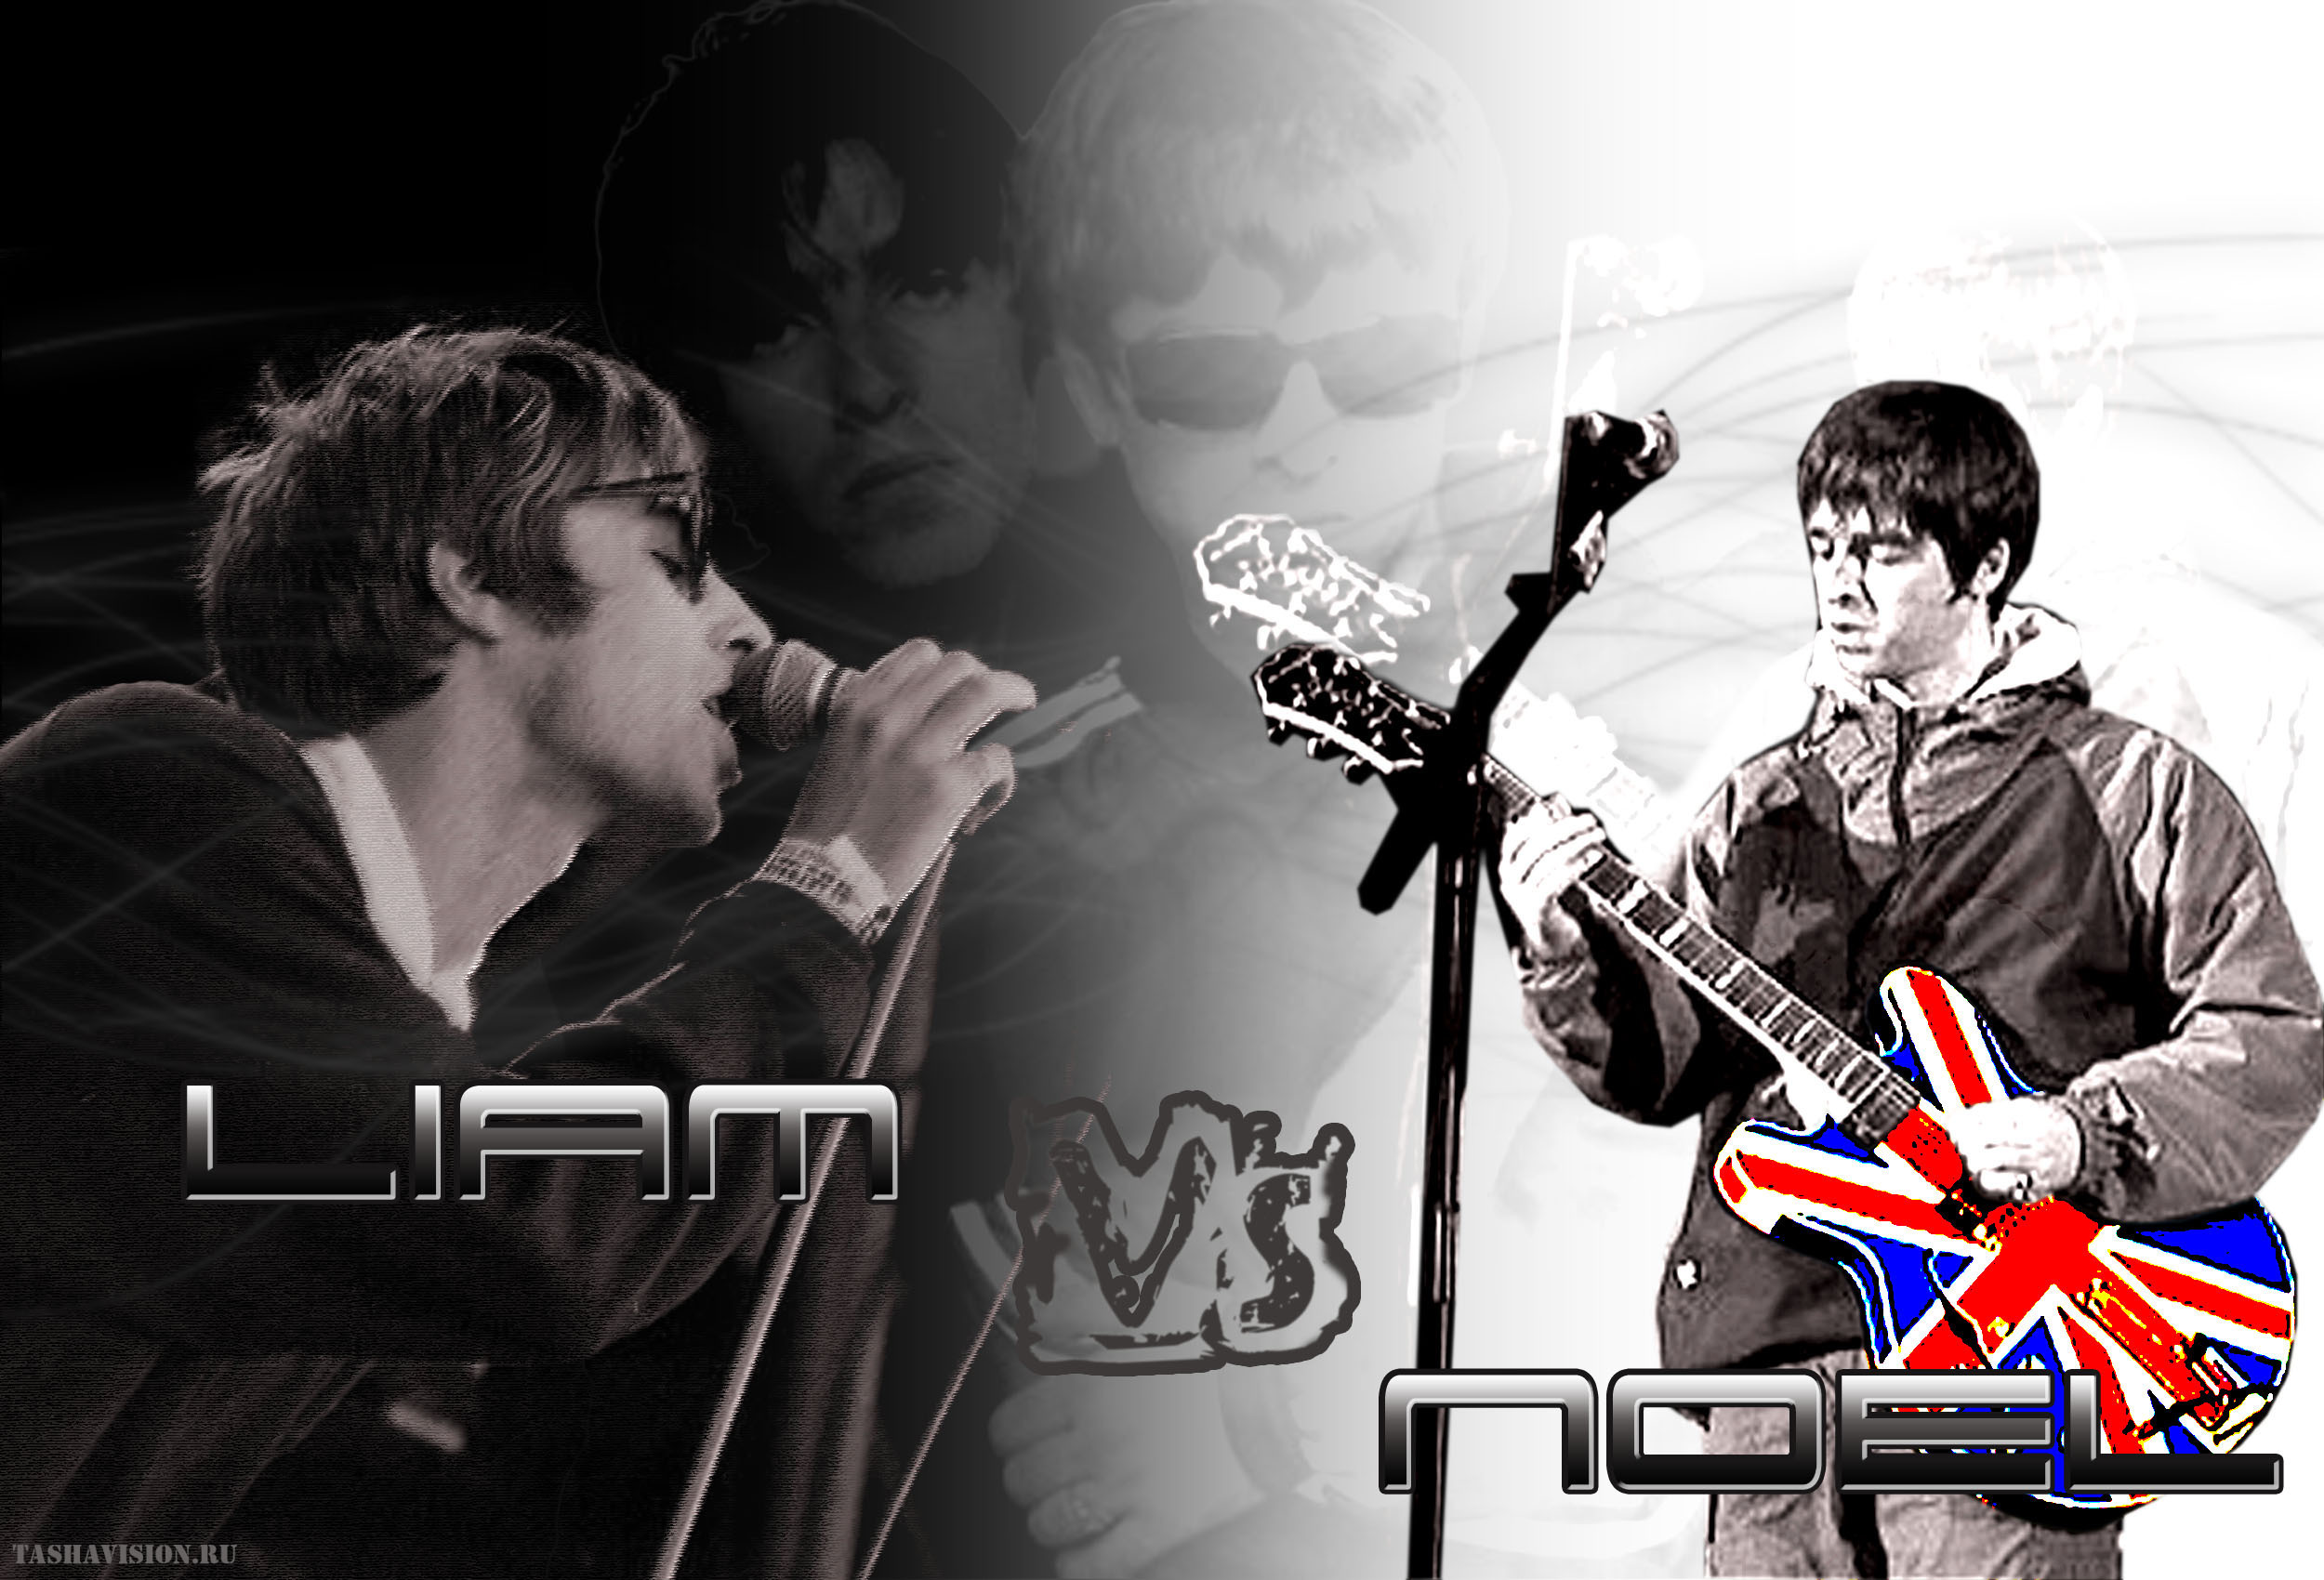 Oasis Band Wallpapers